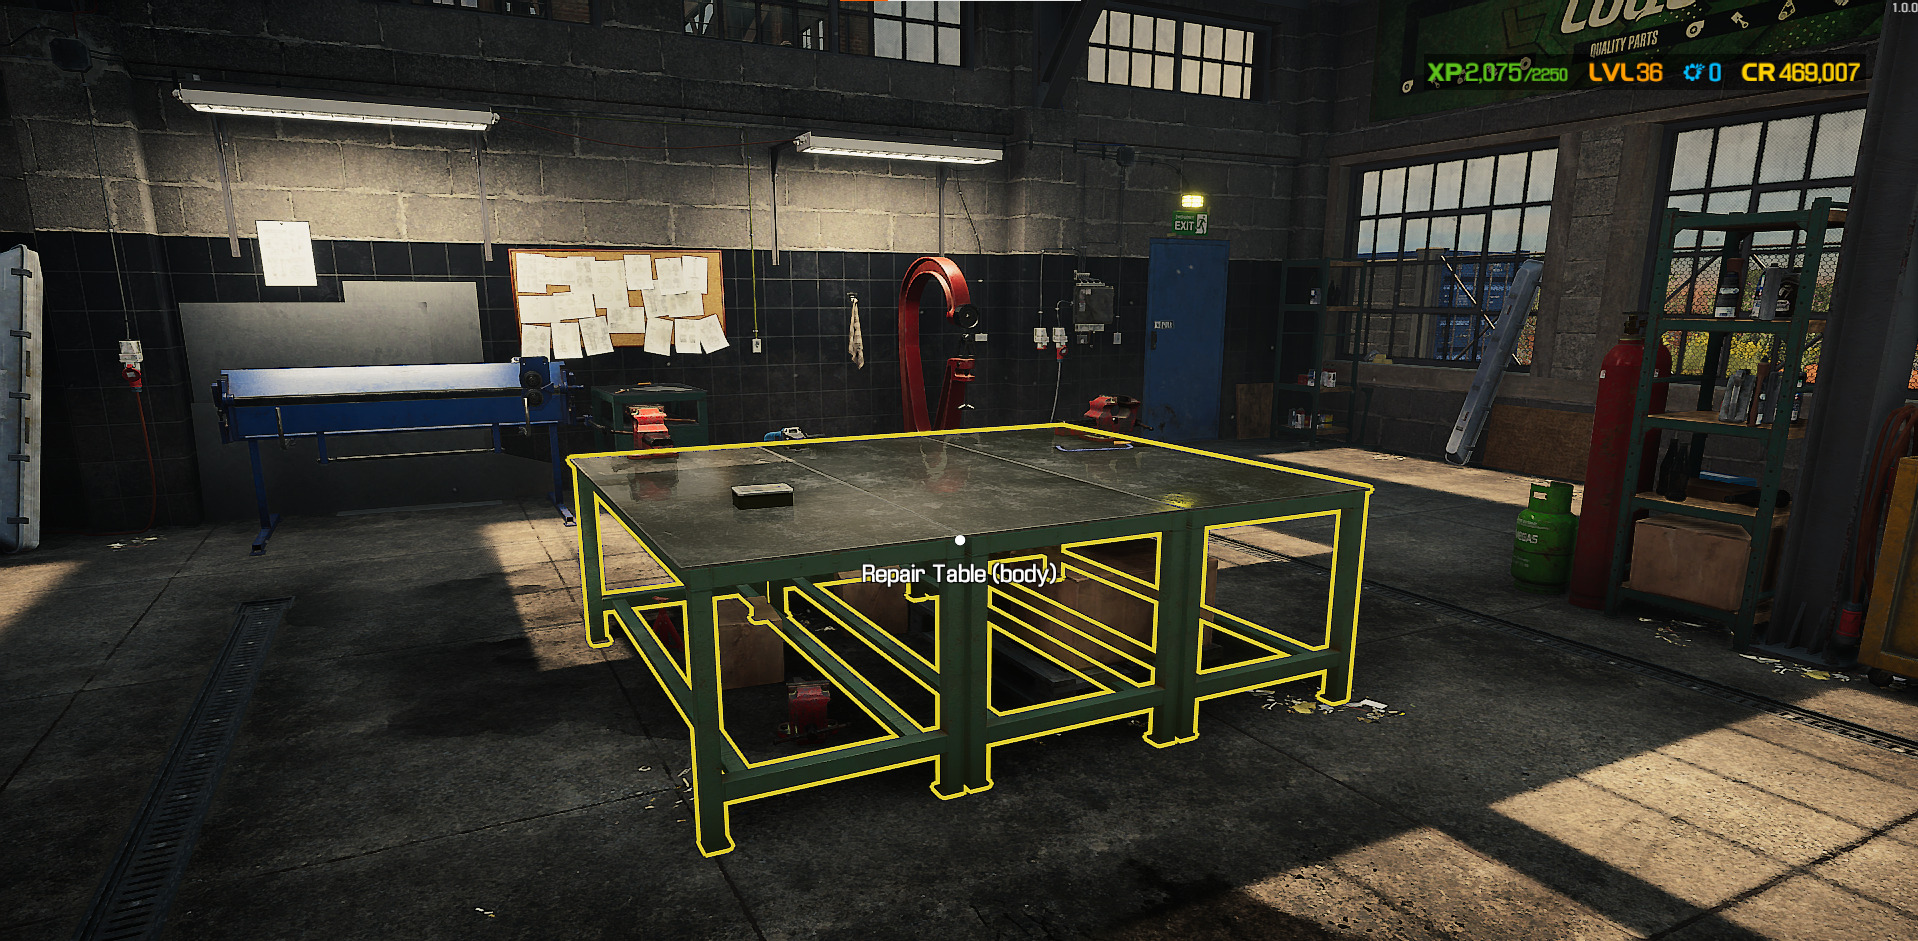 A screenshot showing where you can find the Repair Table in Car Mechanic Simulator